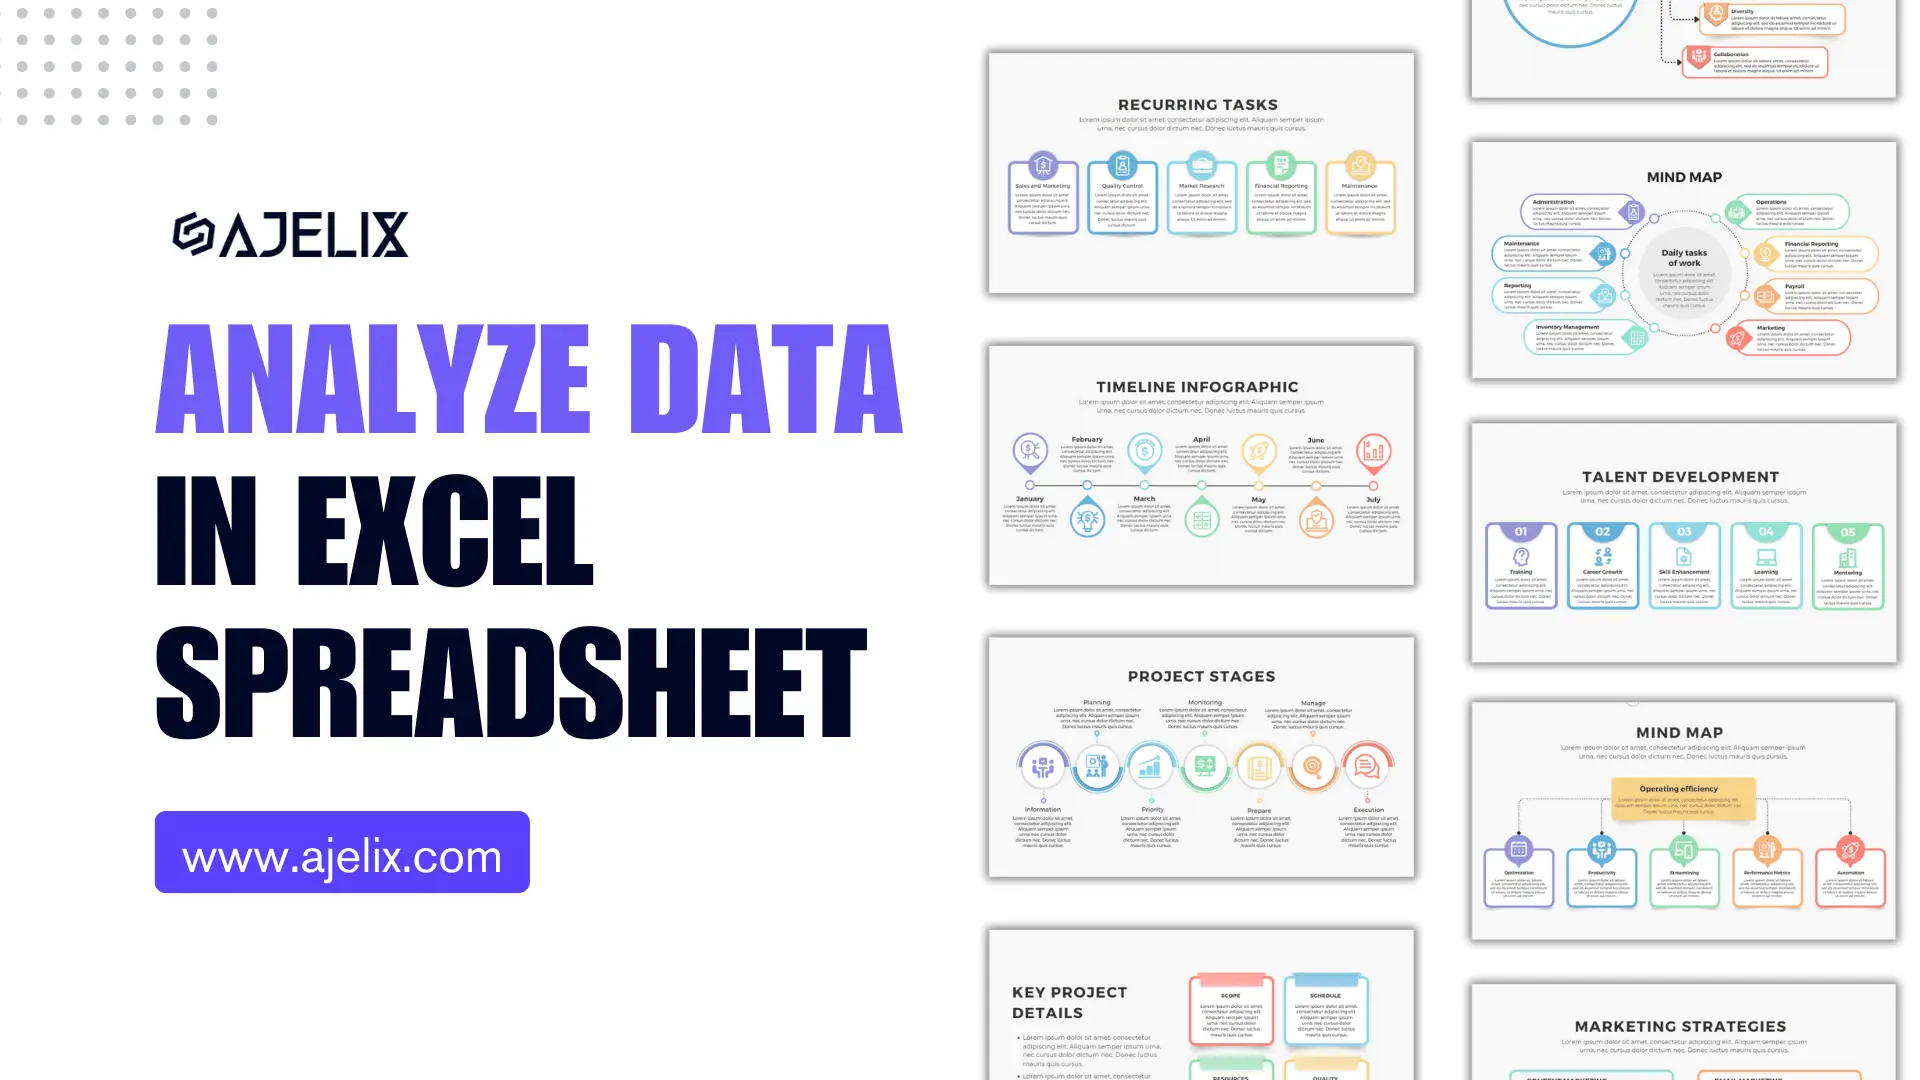 How To Analyze Data In Excel Spreadsheet